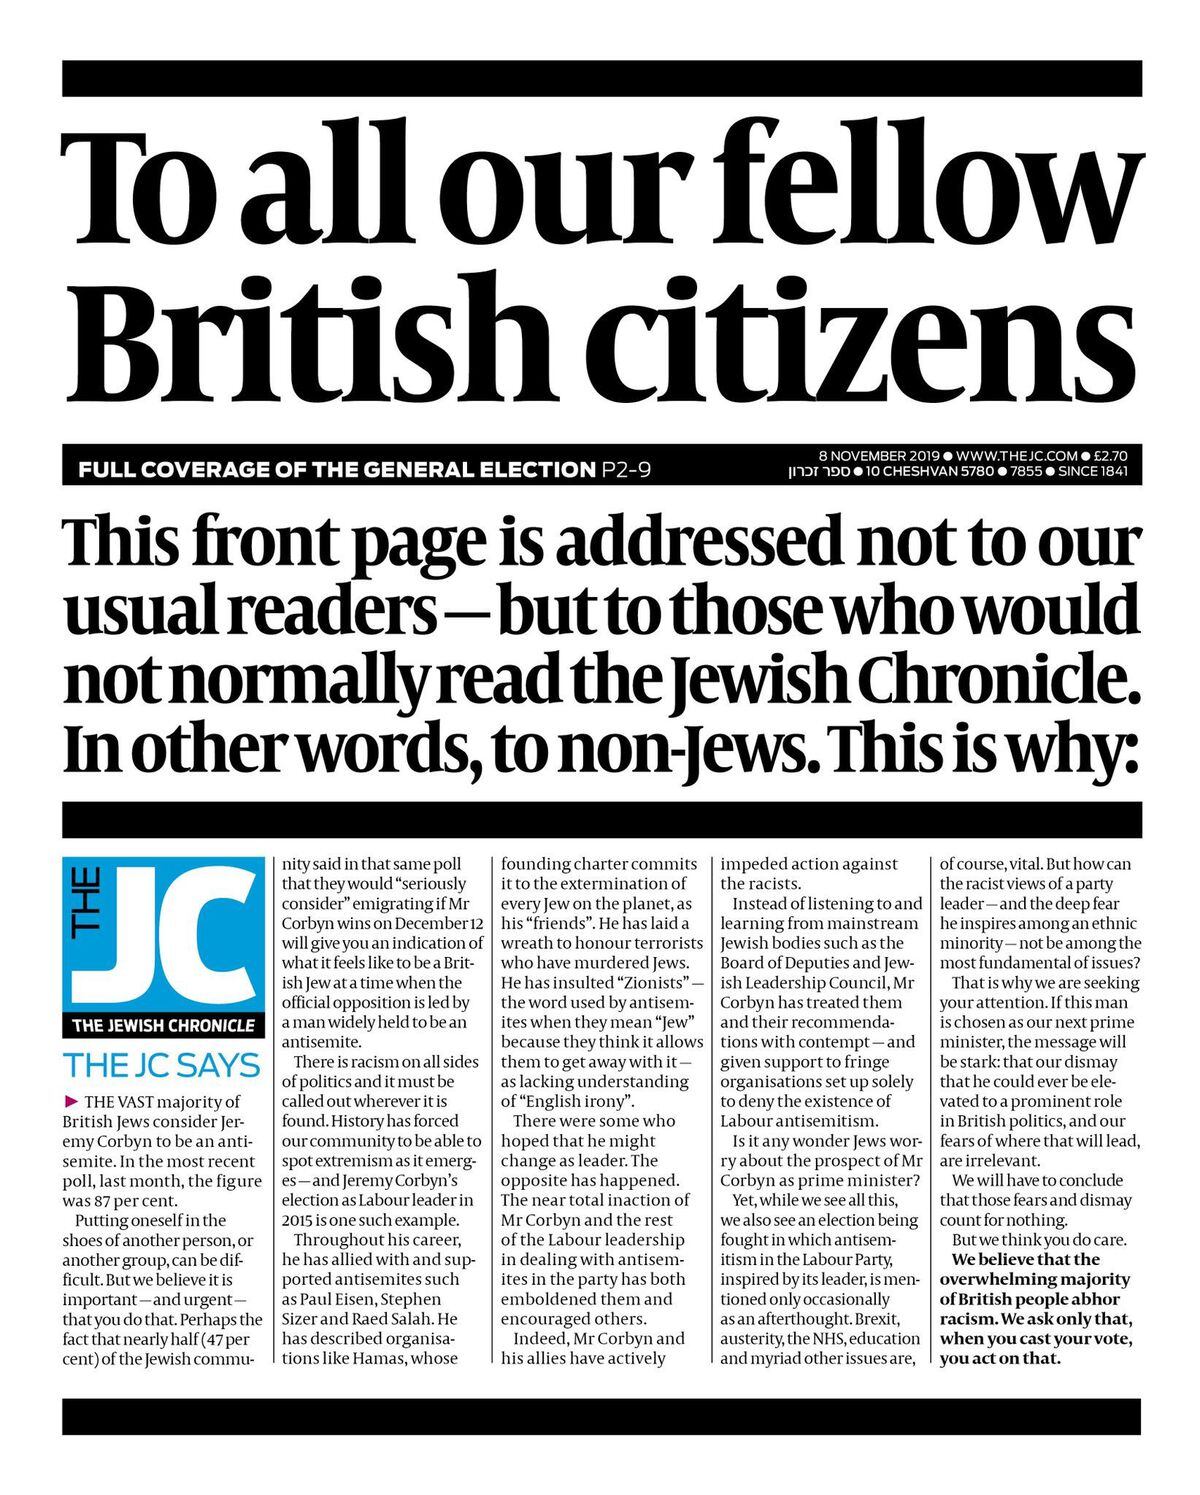 The front of this week's Jewish Chronicle